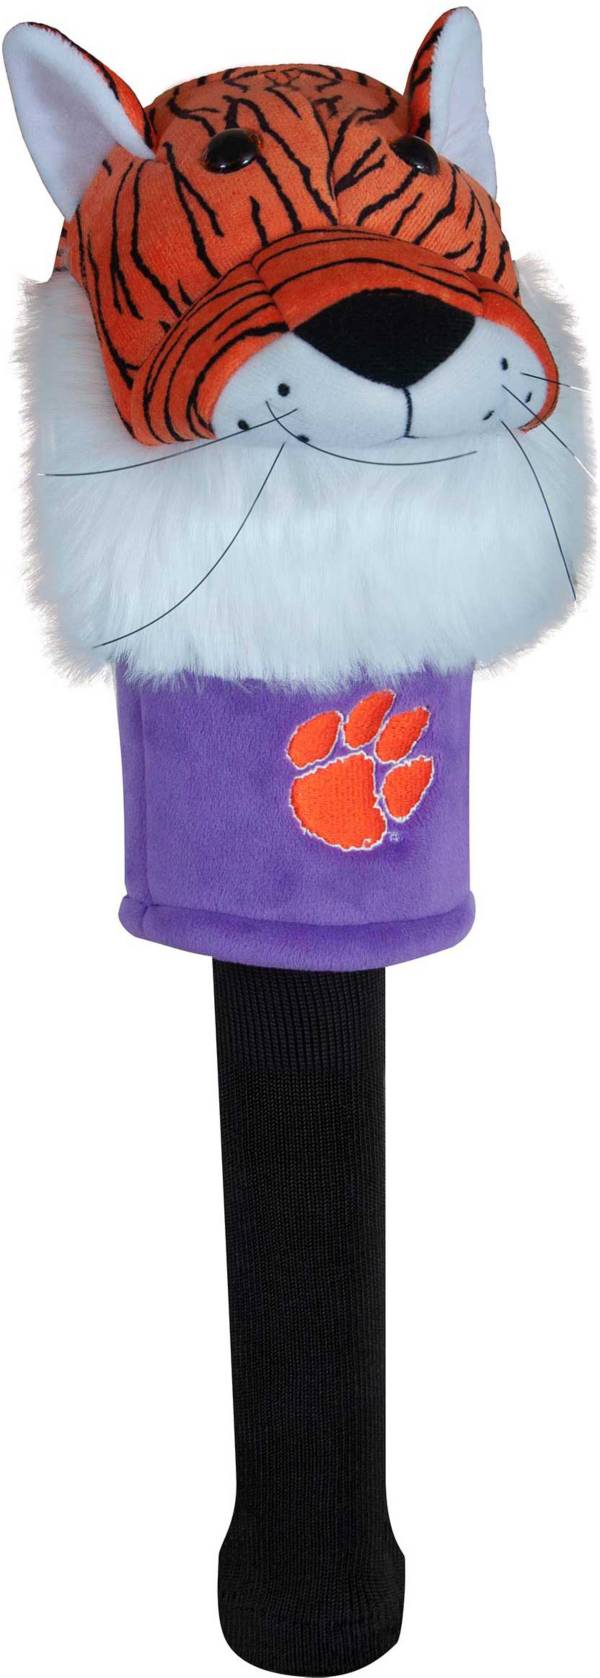 Team Effort Clemson Tigers Mascot Headcover product image